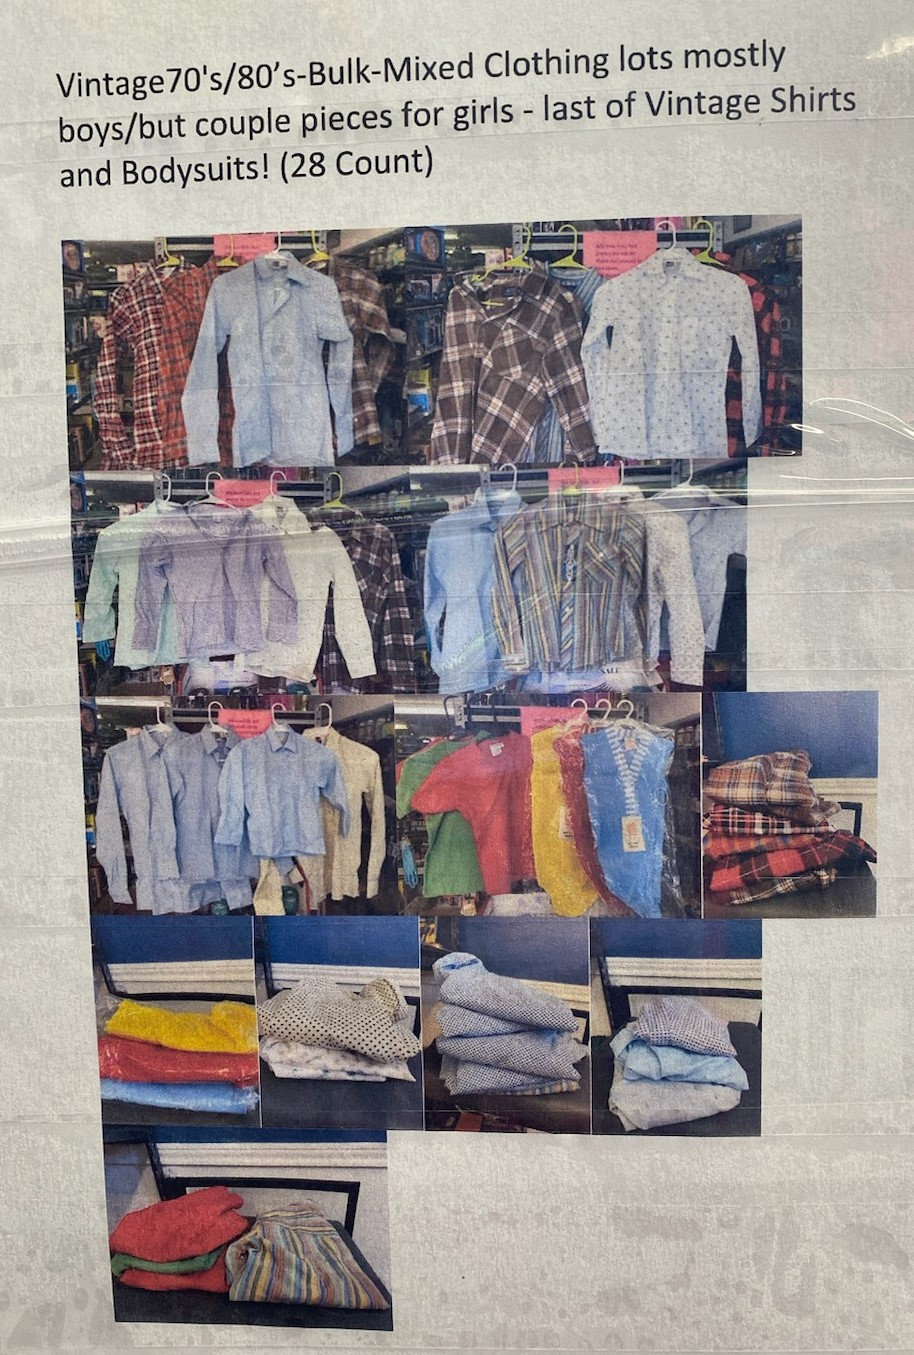 Vintage70's/80s-bulk-mixed Clothing Lots Mostly Boys/but Couple